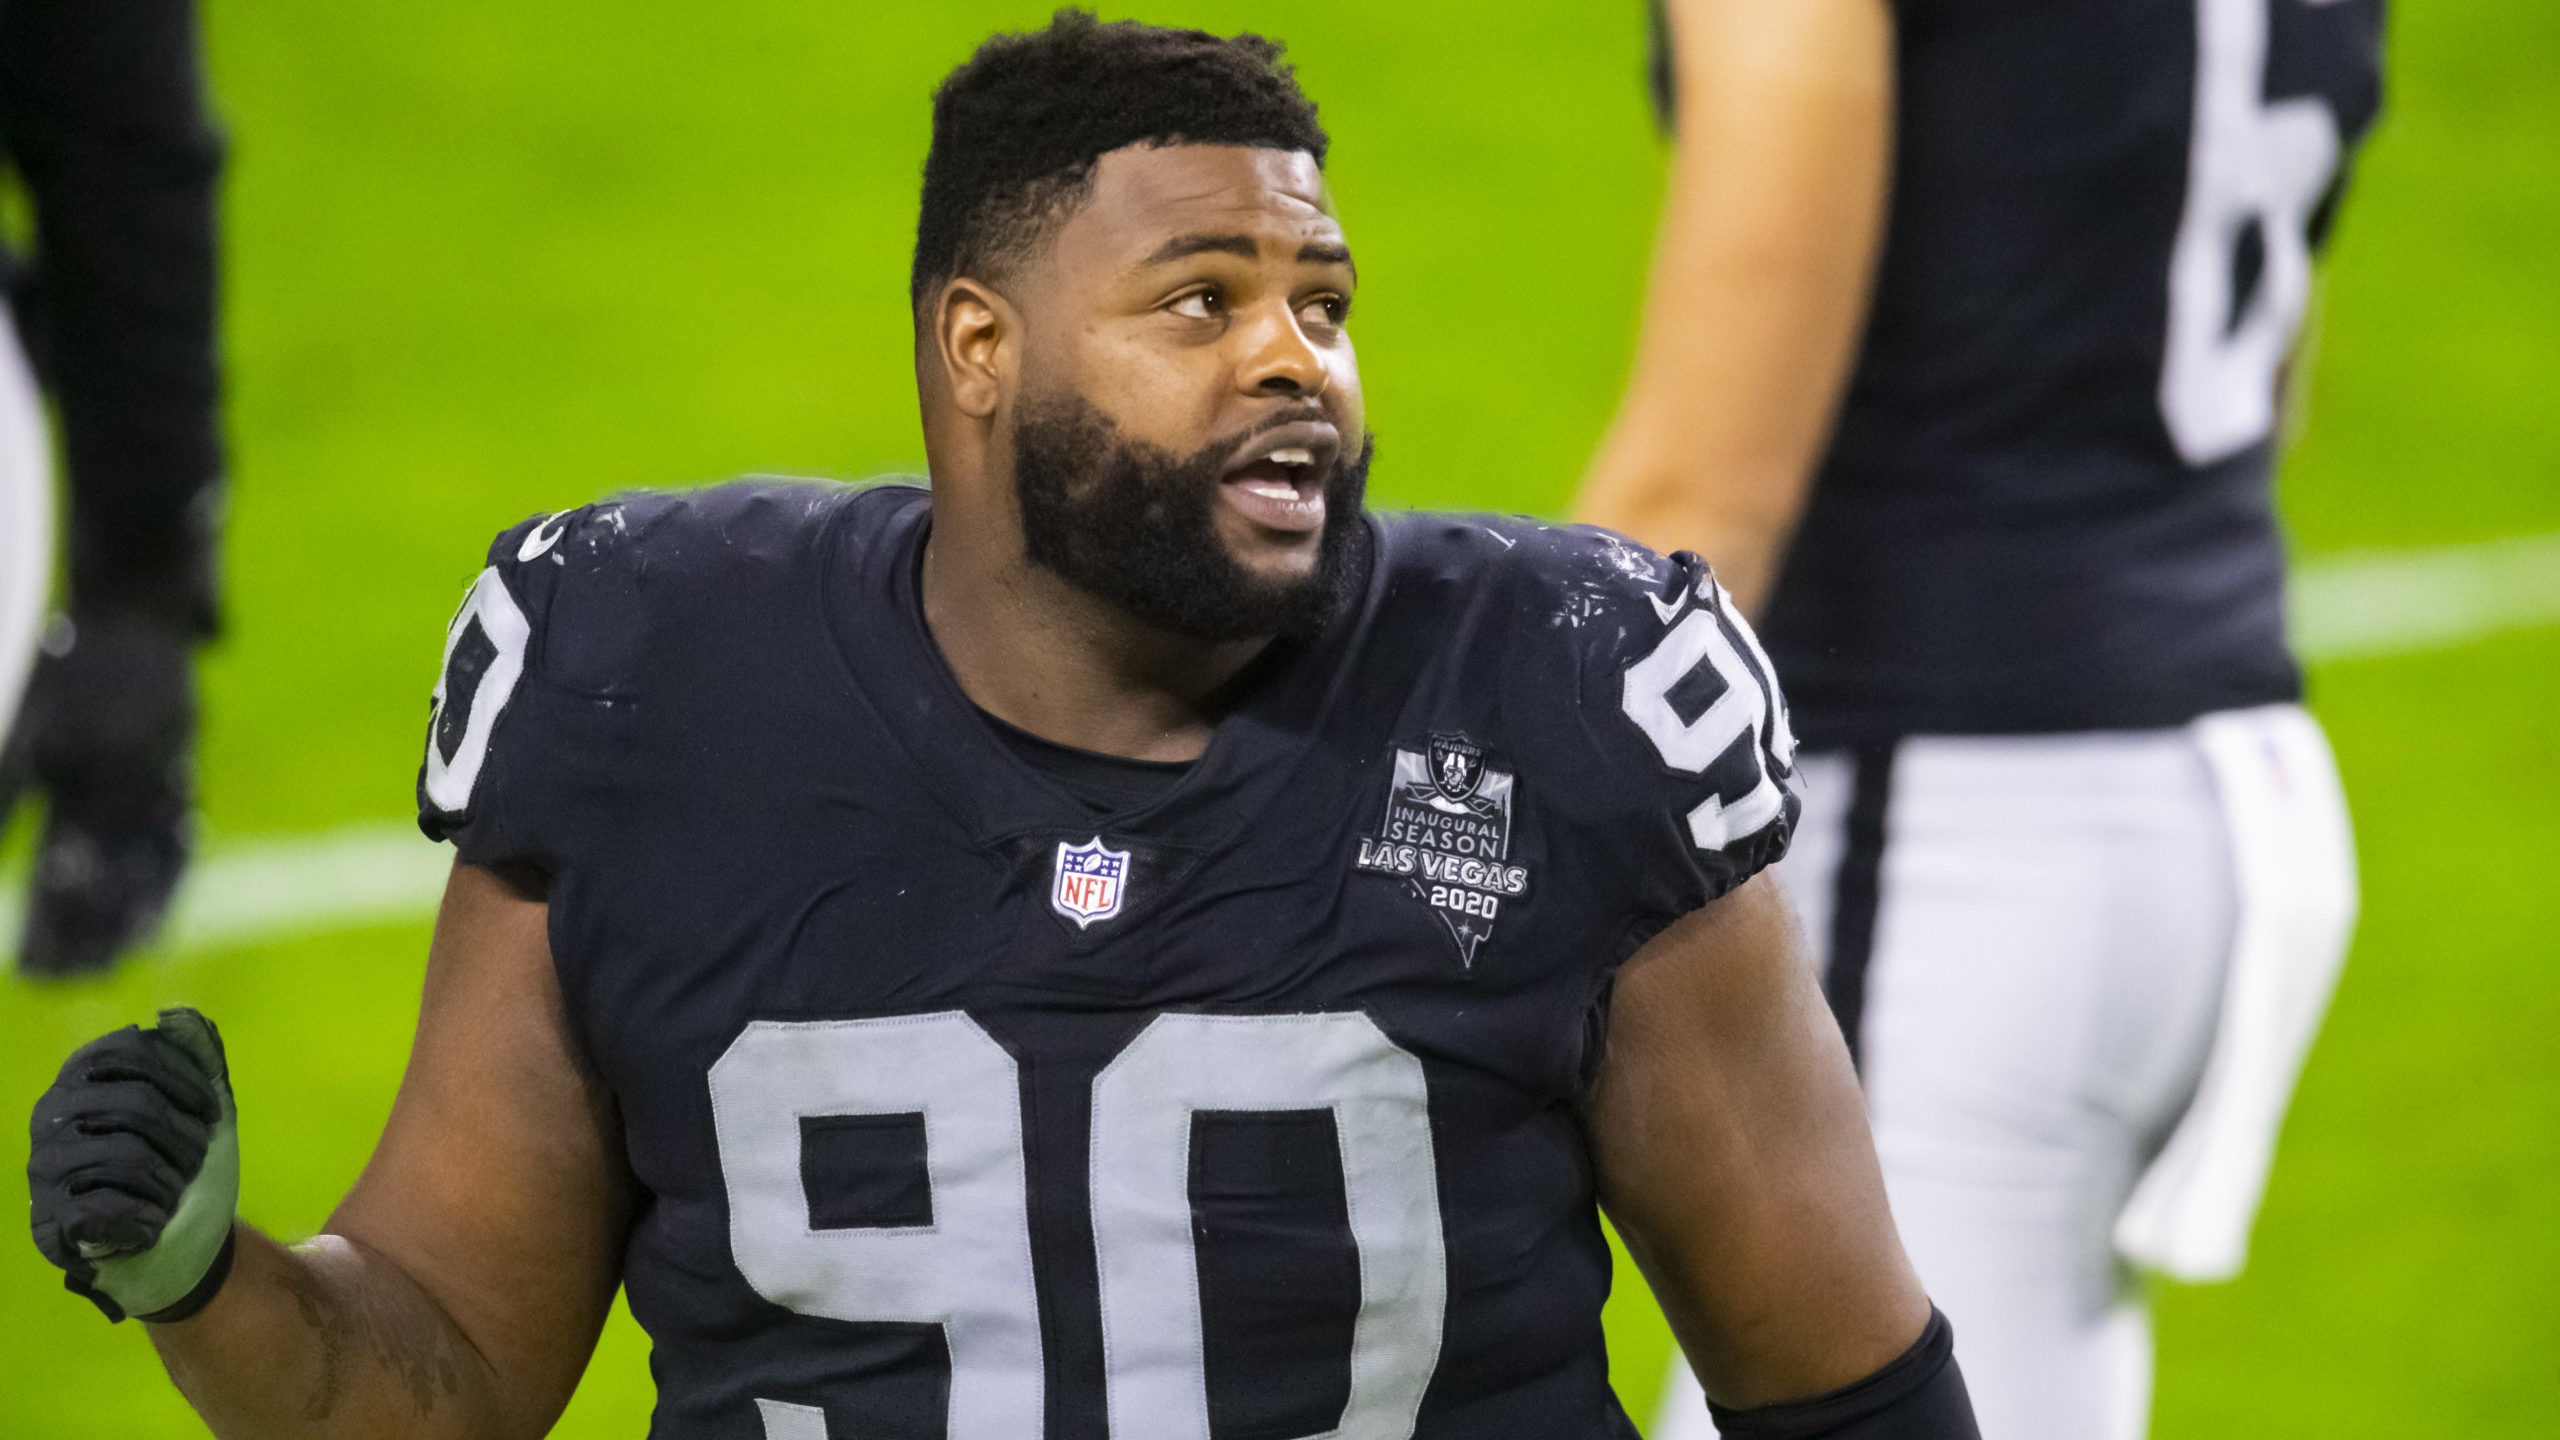 Cowboys Add Depth by Acquiring DT Hankins From Raiders